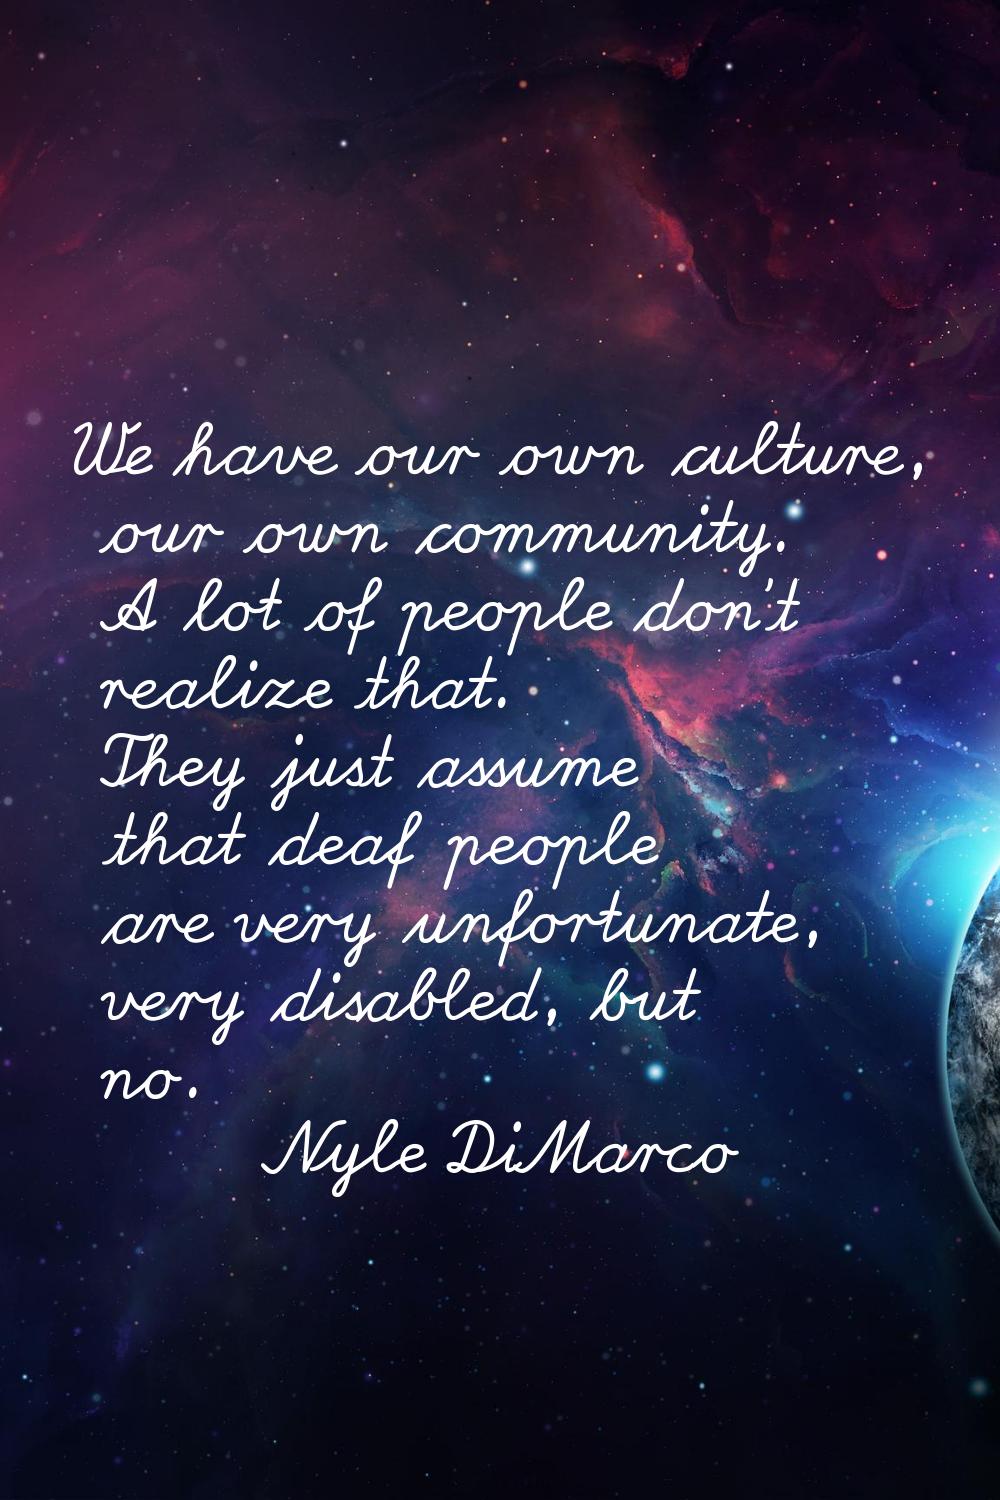 We have our own culture, our own community. A lot of people don't realize that. They just assume th